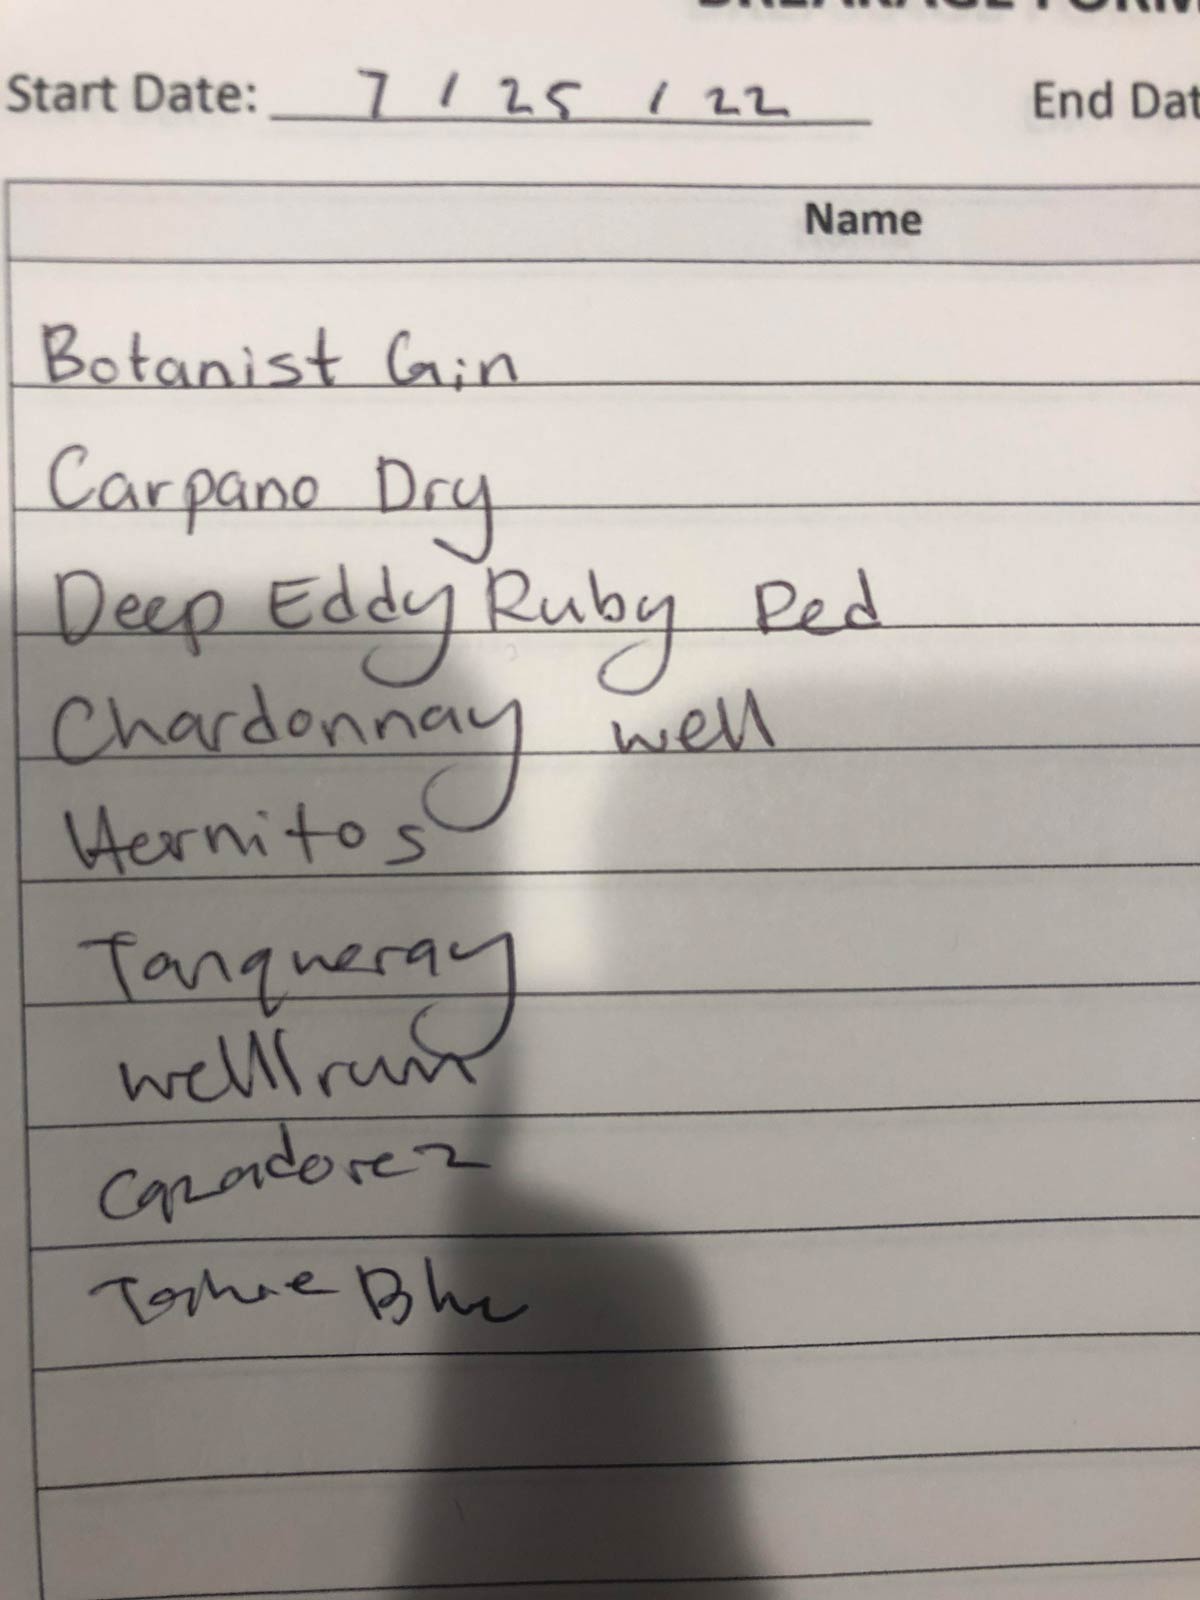 I’m a bartender, and this is my coworkers bottle usage form from last night. I can see her getting drunker from her hand writing